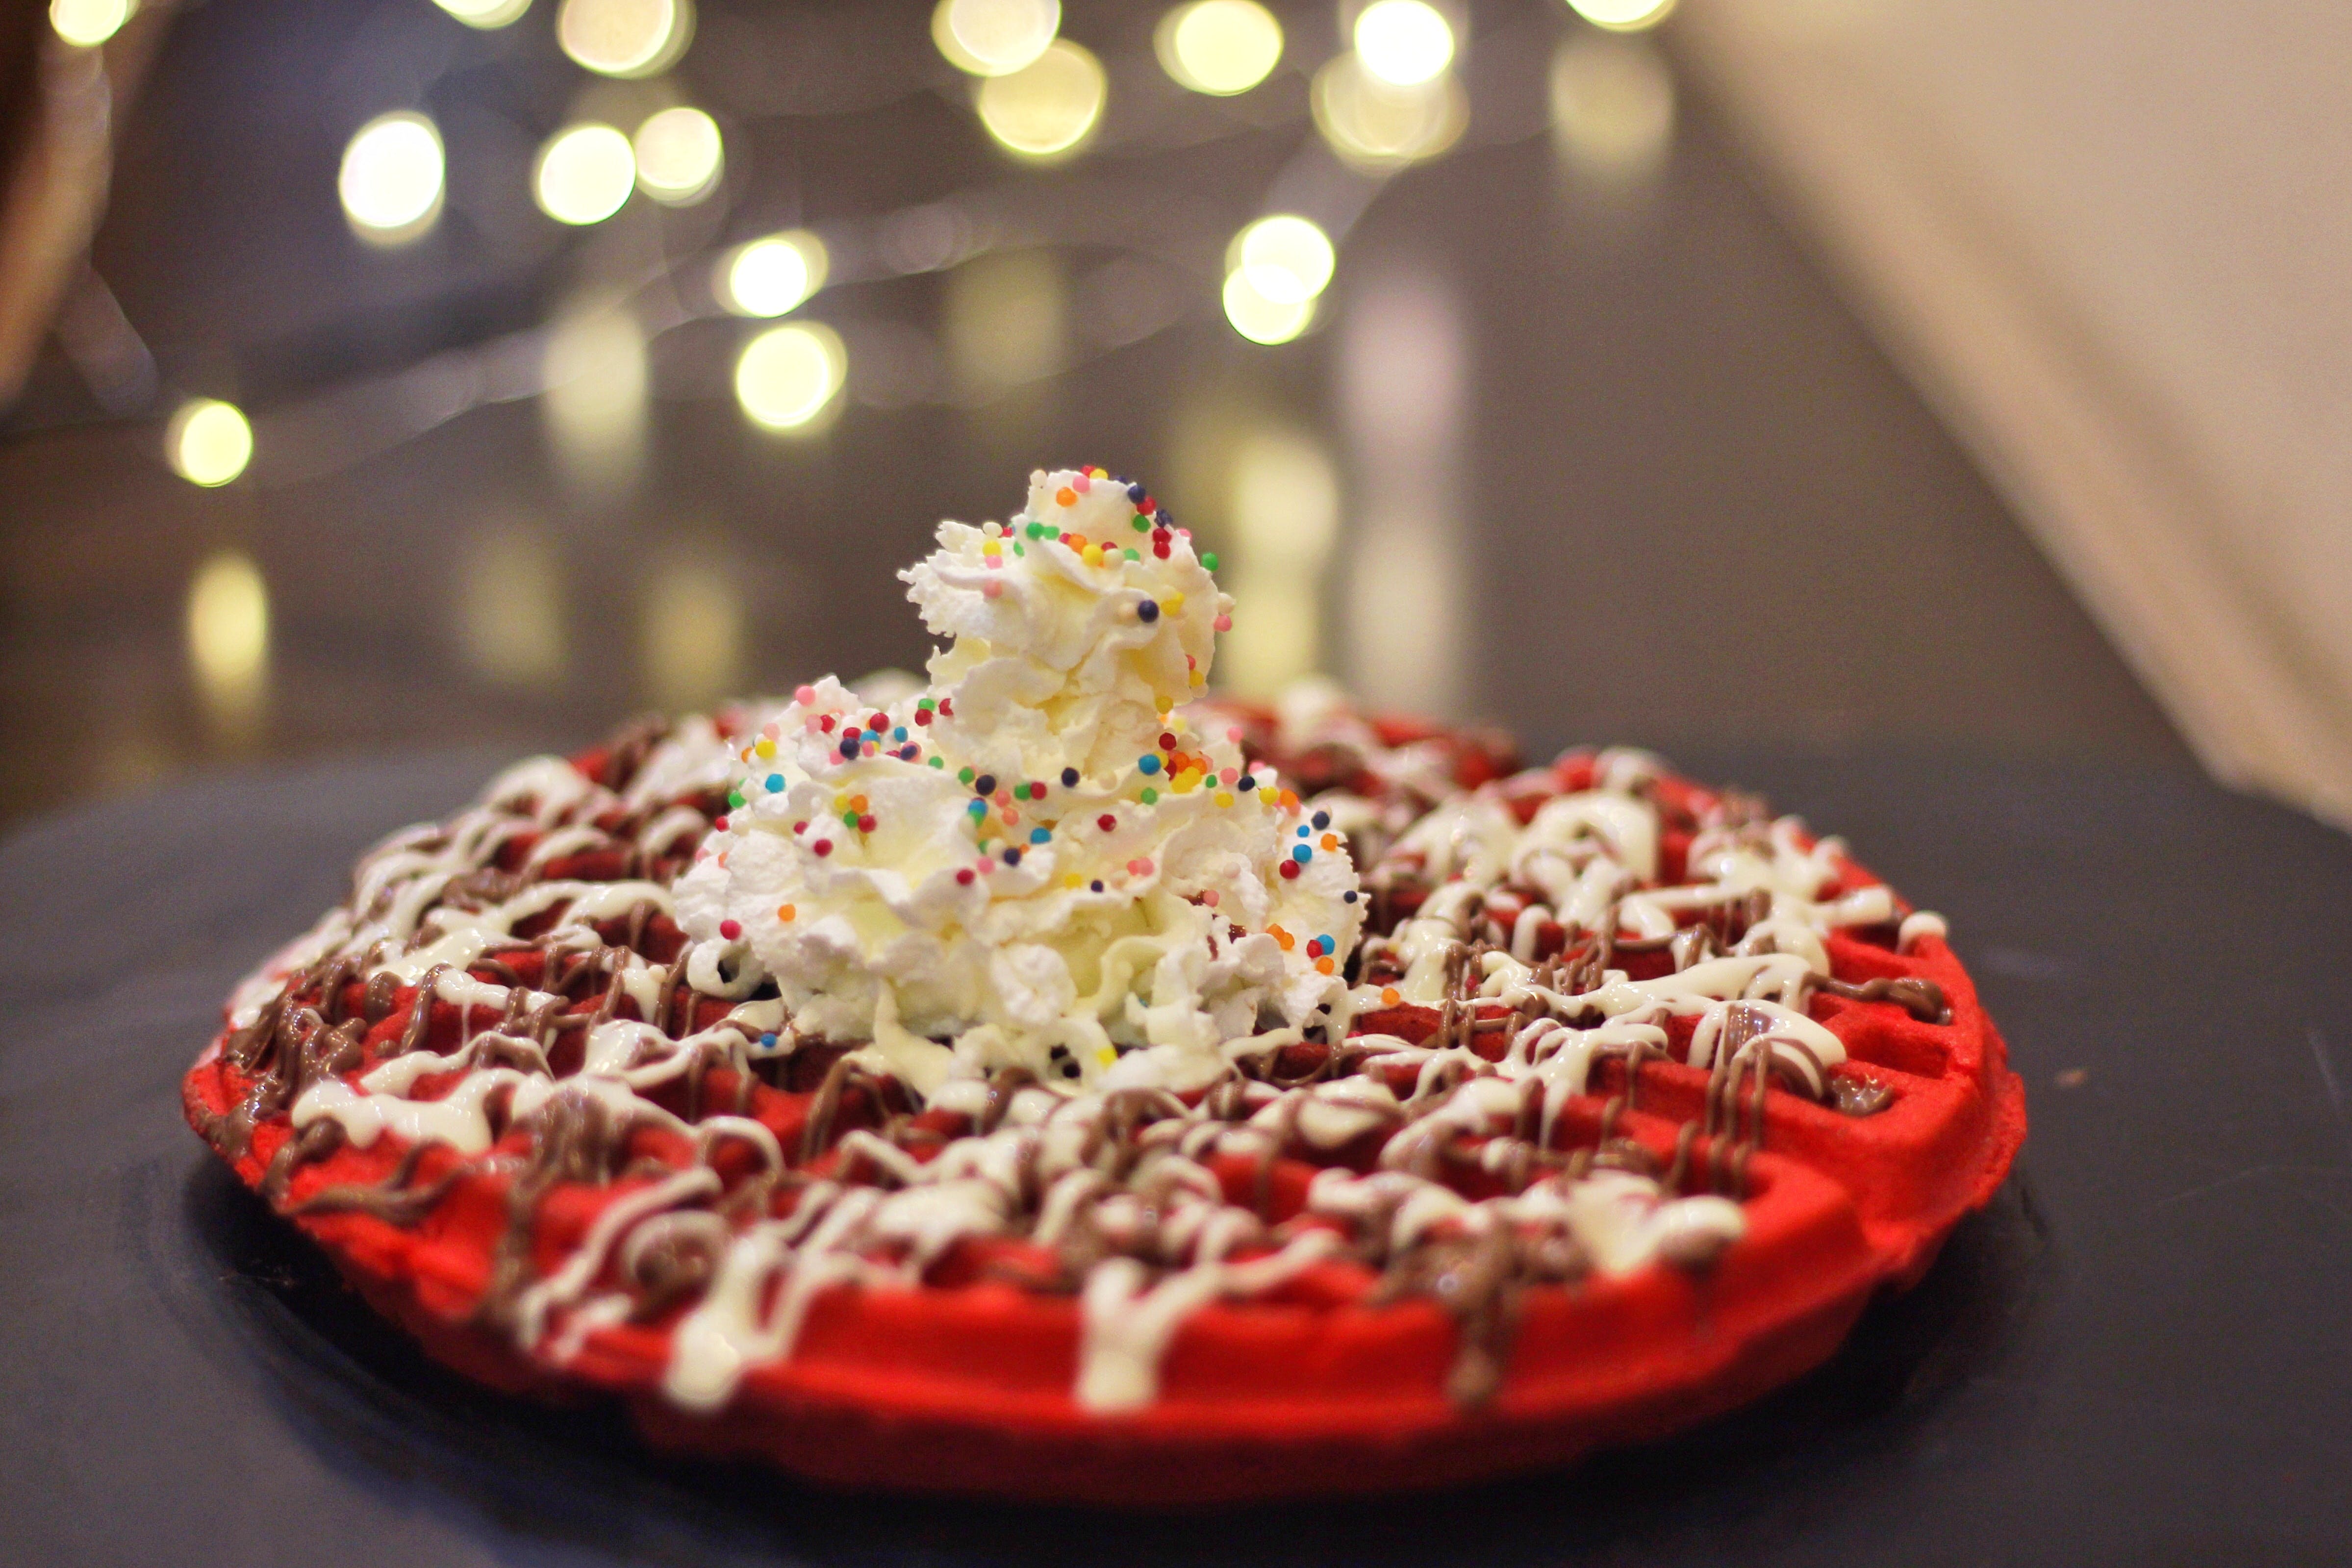 Red,Sprinkles,Food,Cuisine,Sweetness,Dish,Dessert,Confectionery,Christmas,Whipped cream